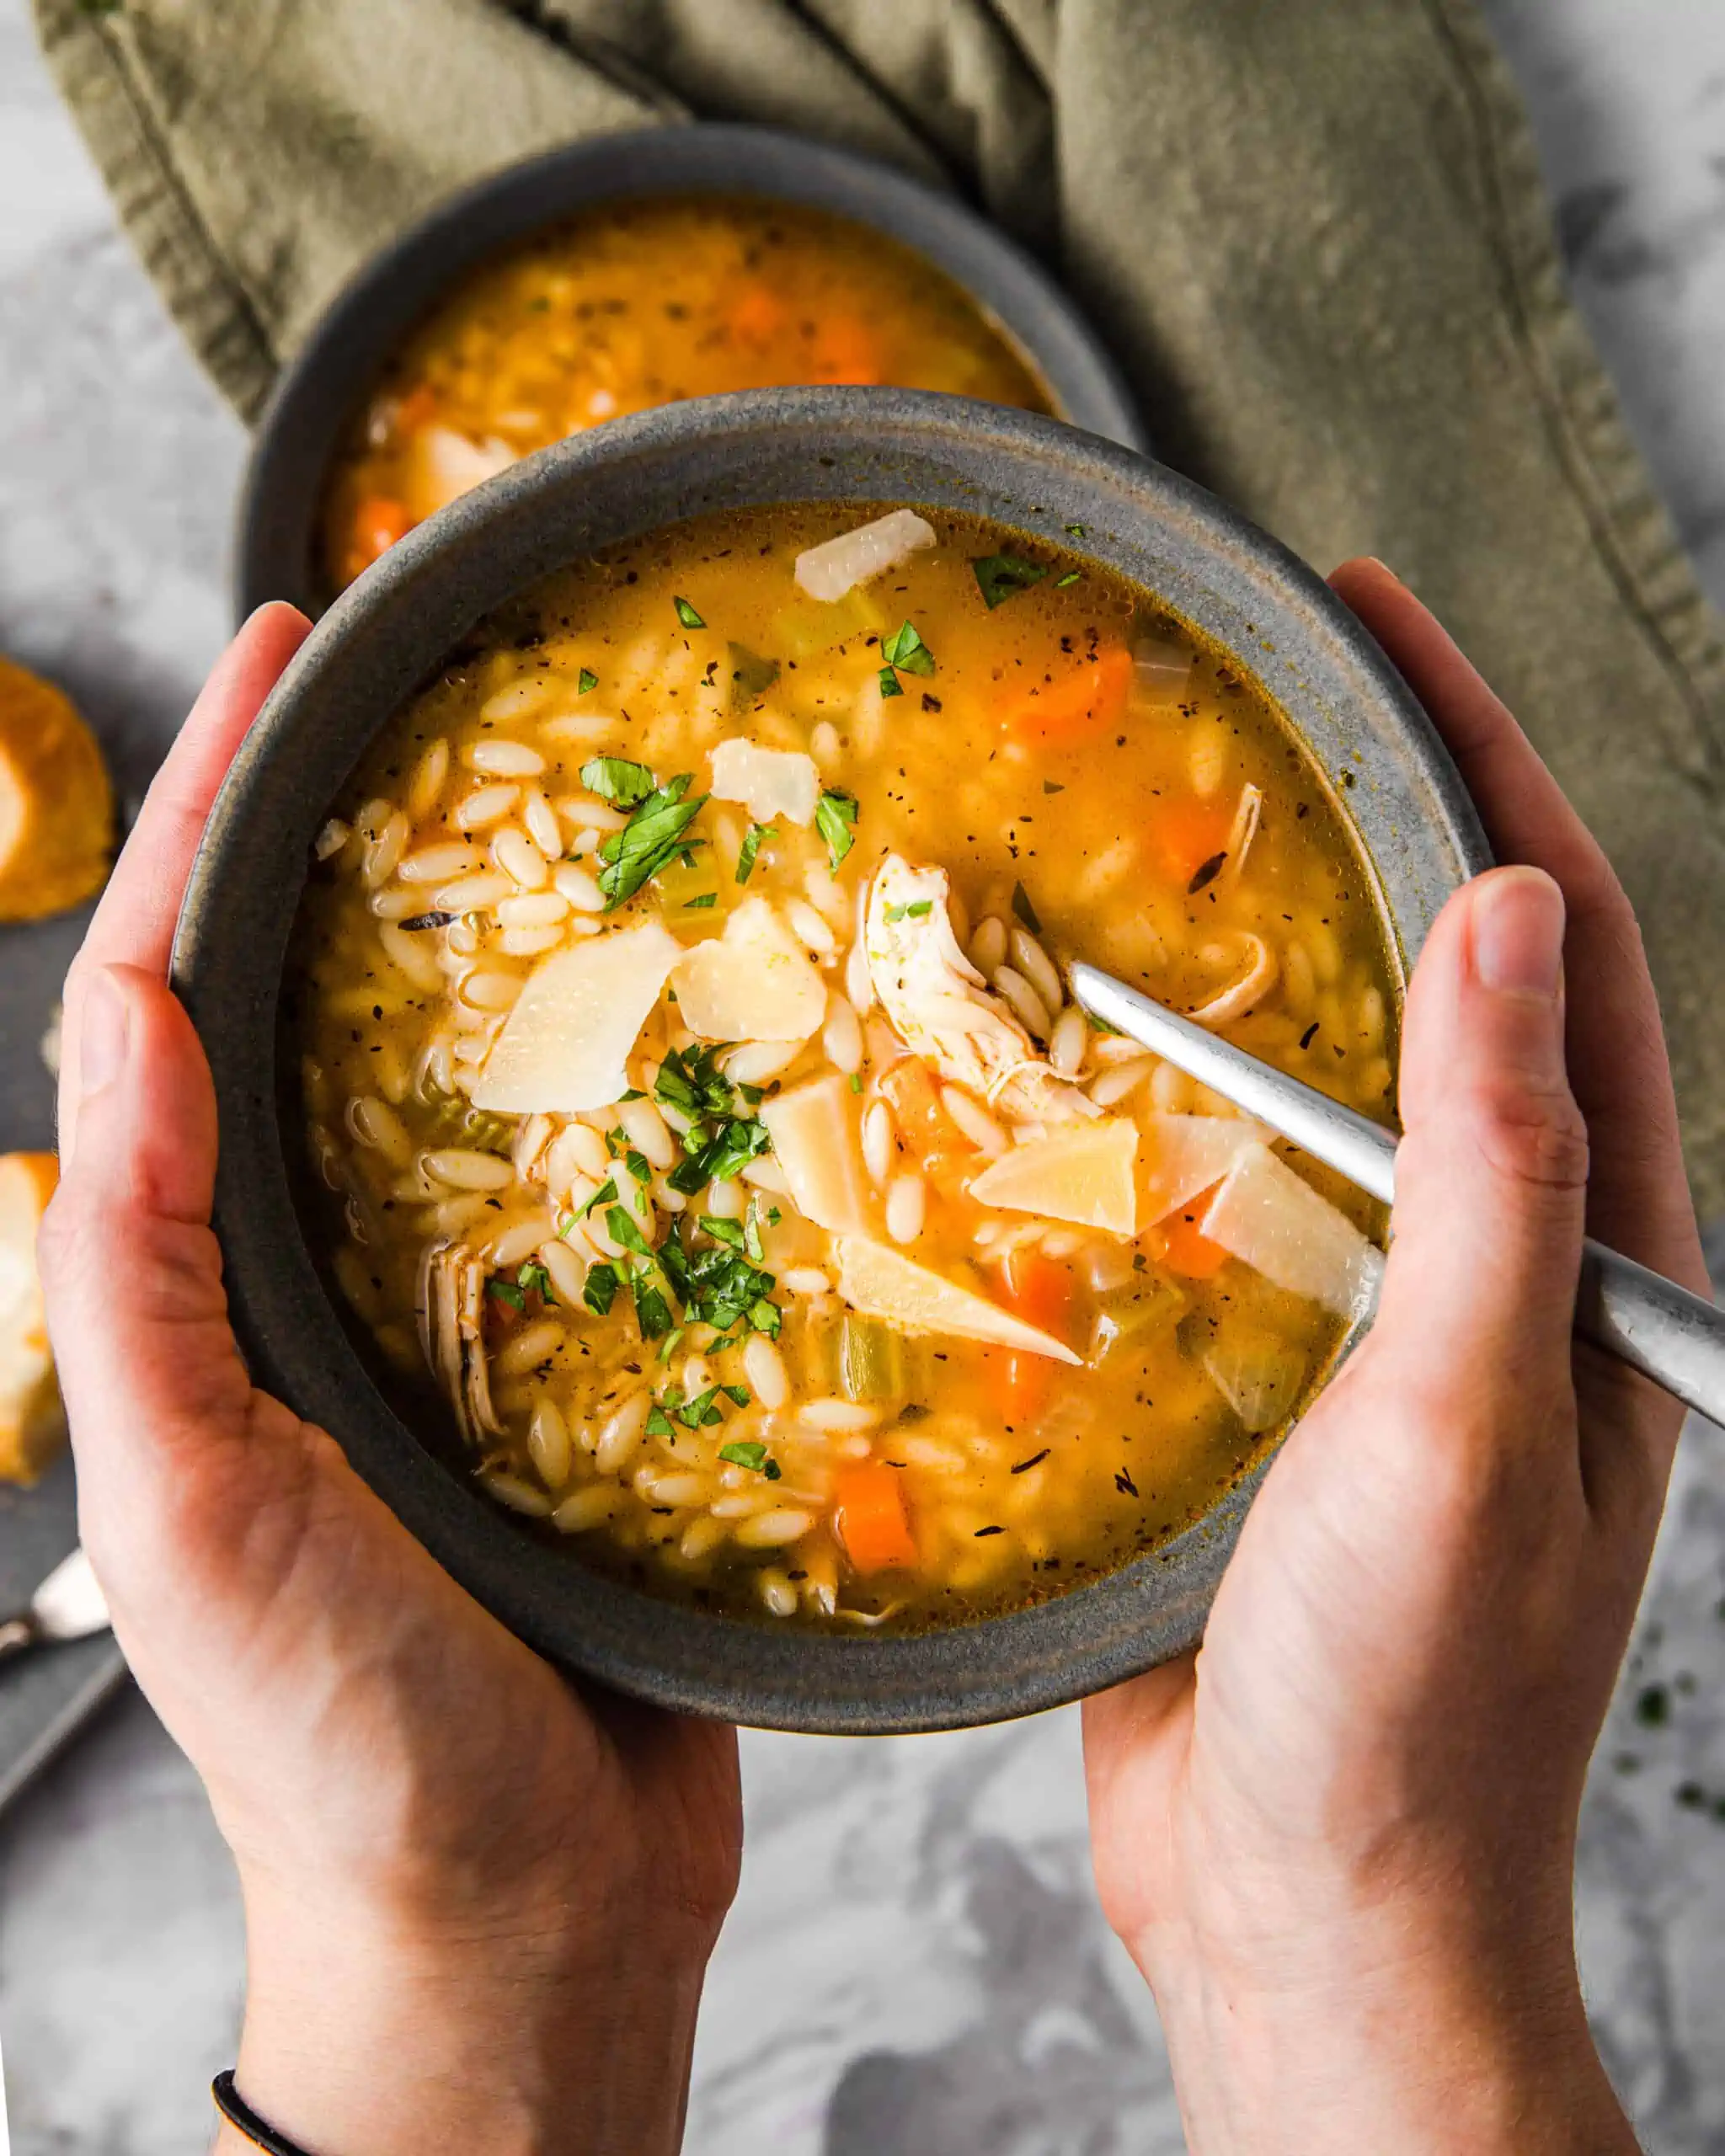 holding a bowl of chicken orzo soup.